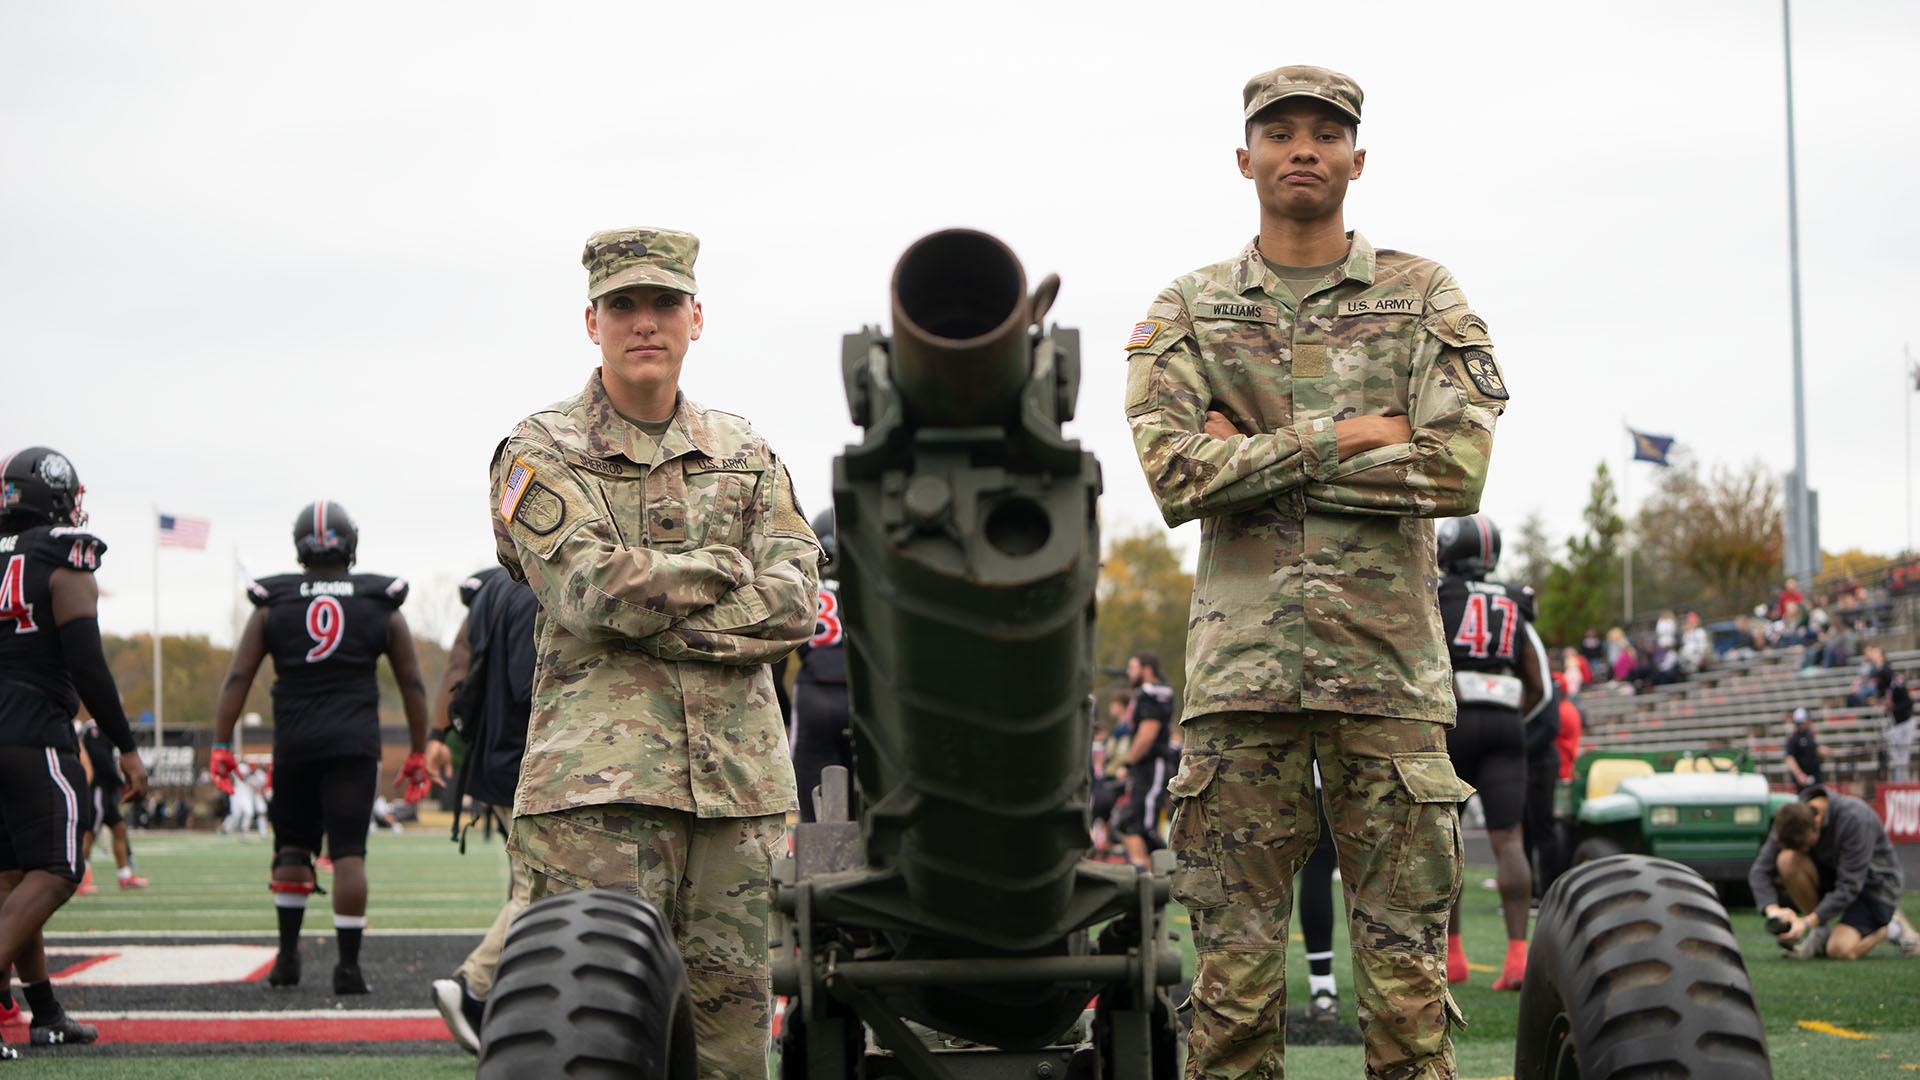 male and female ROTC soliders with cannon at GWU football game